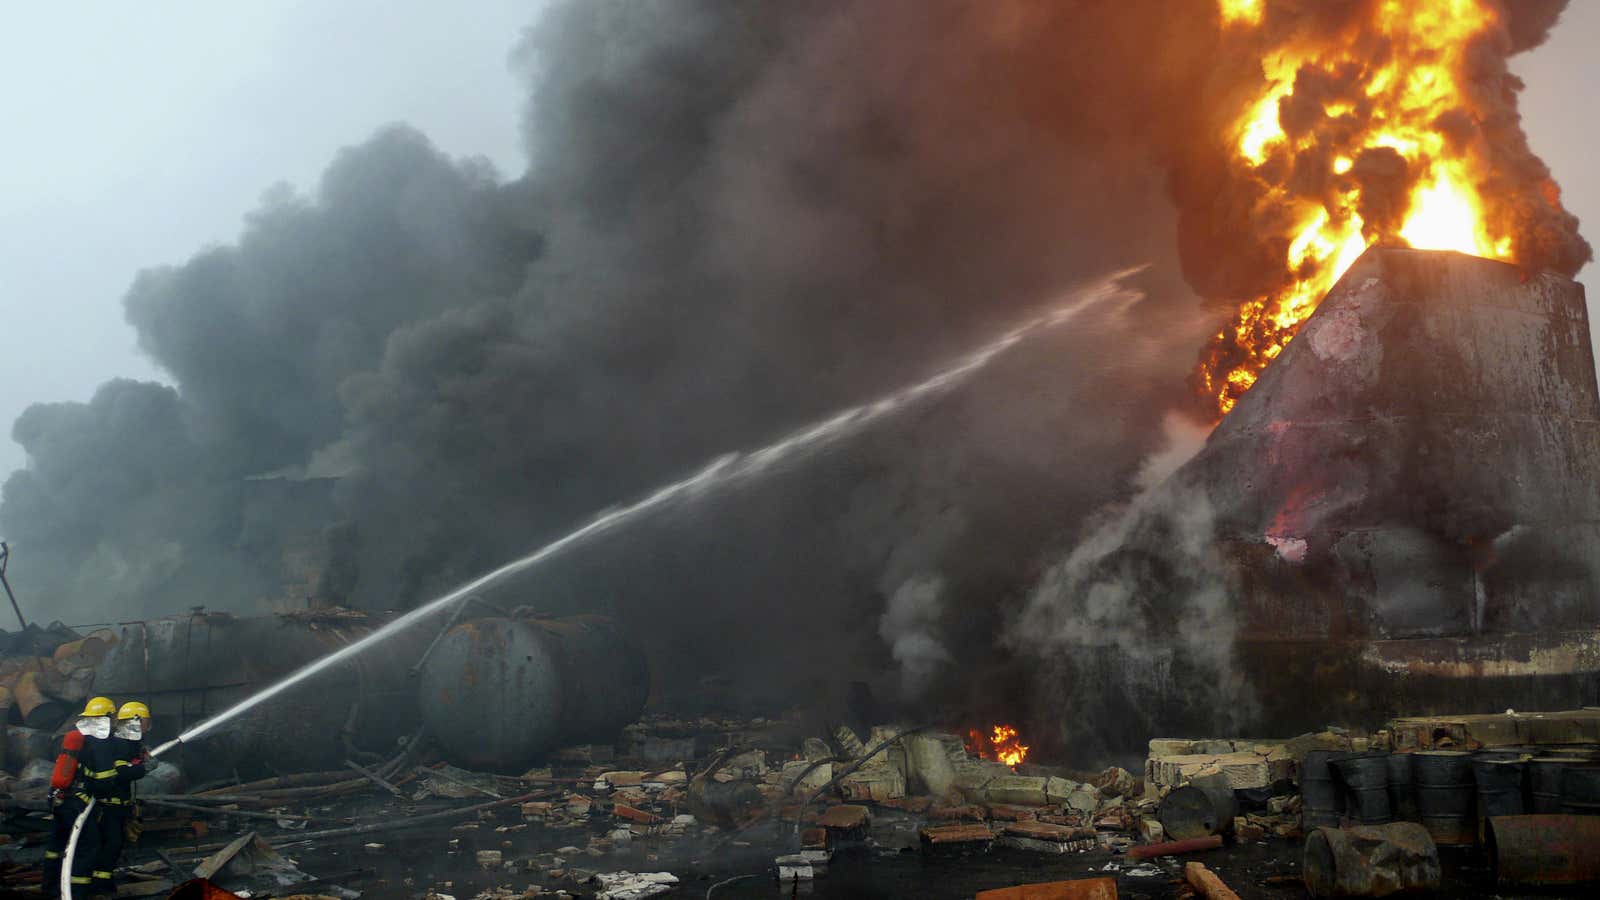 Can 300 billion yuan in three days put out China’s latest fire?